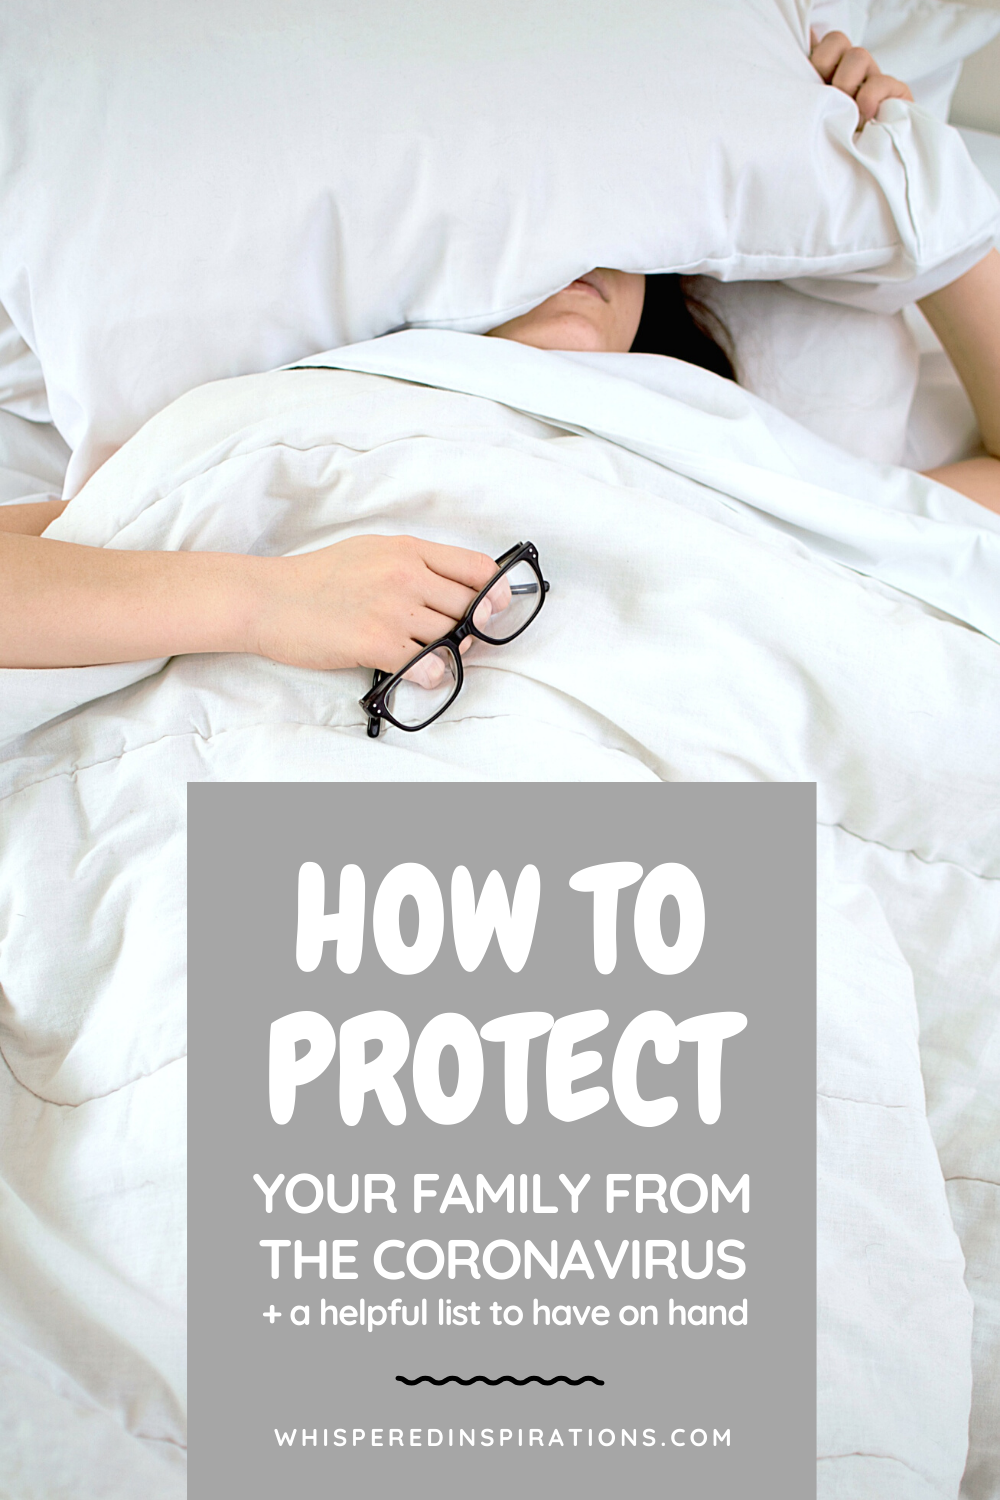 A woman is sick in bed. She is covering her head with a pillow, under her blanket, and is holding her glasses. A banner reads, "How to Protect Your Family from the Coronavirus."